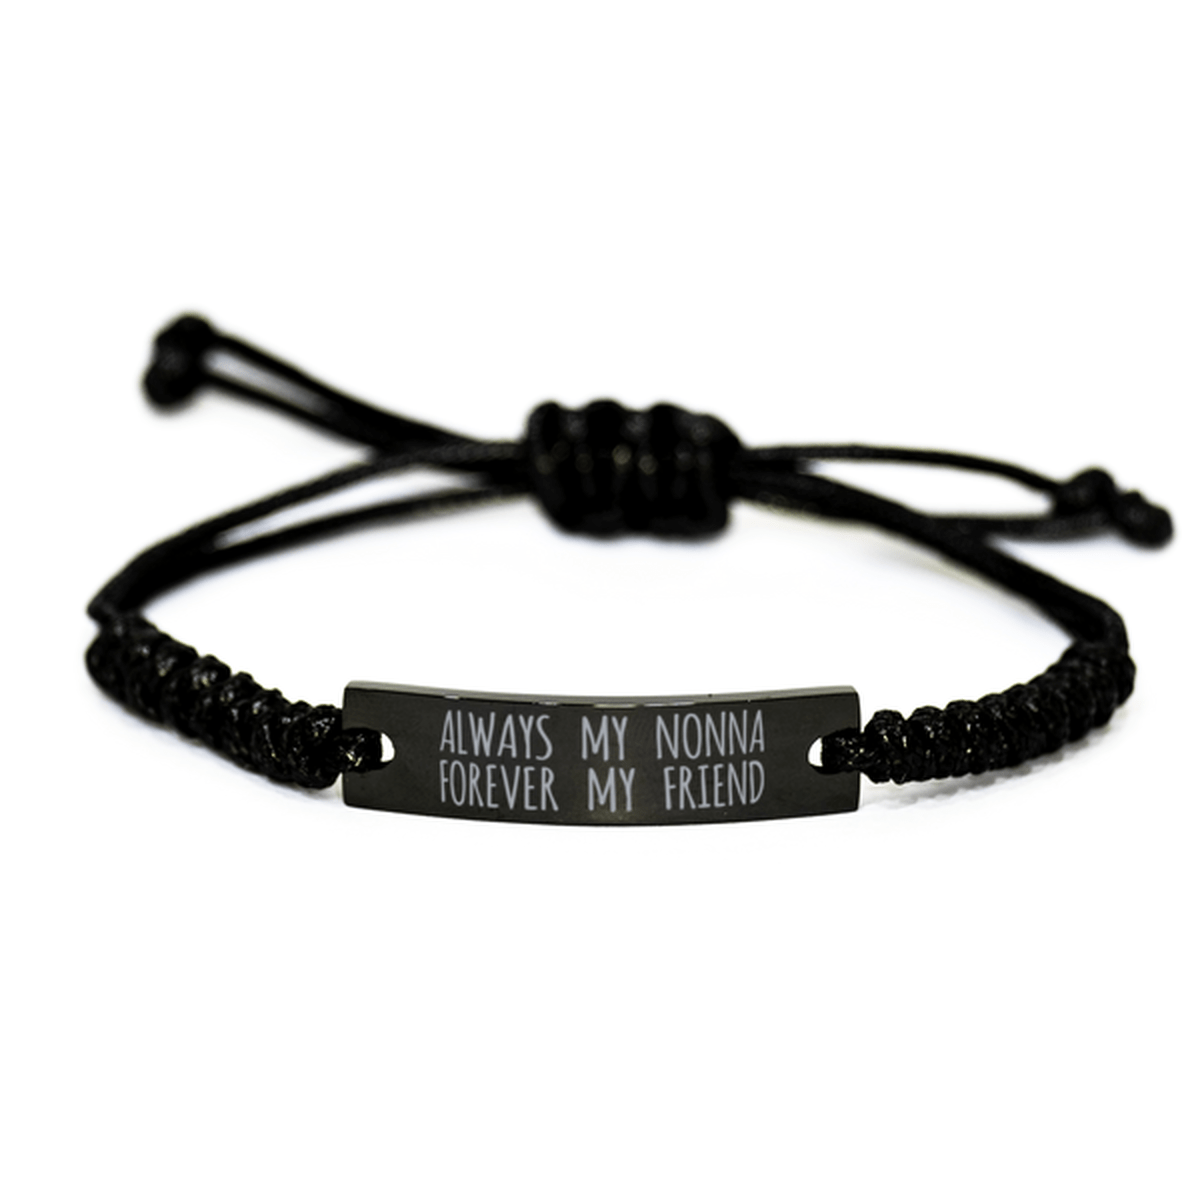 Inspirational Nonna Black Rope Bracelet, Always My Nonna Forever My Friend, Best Birthday Gifts For Family